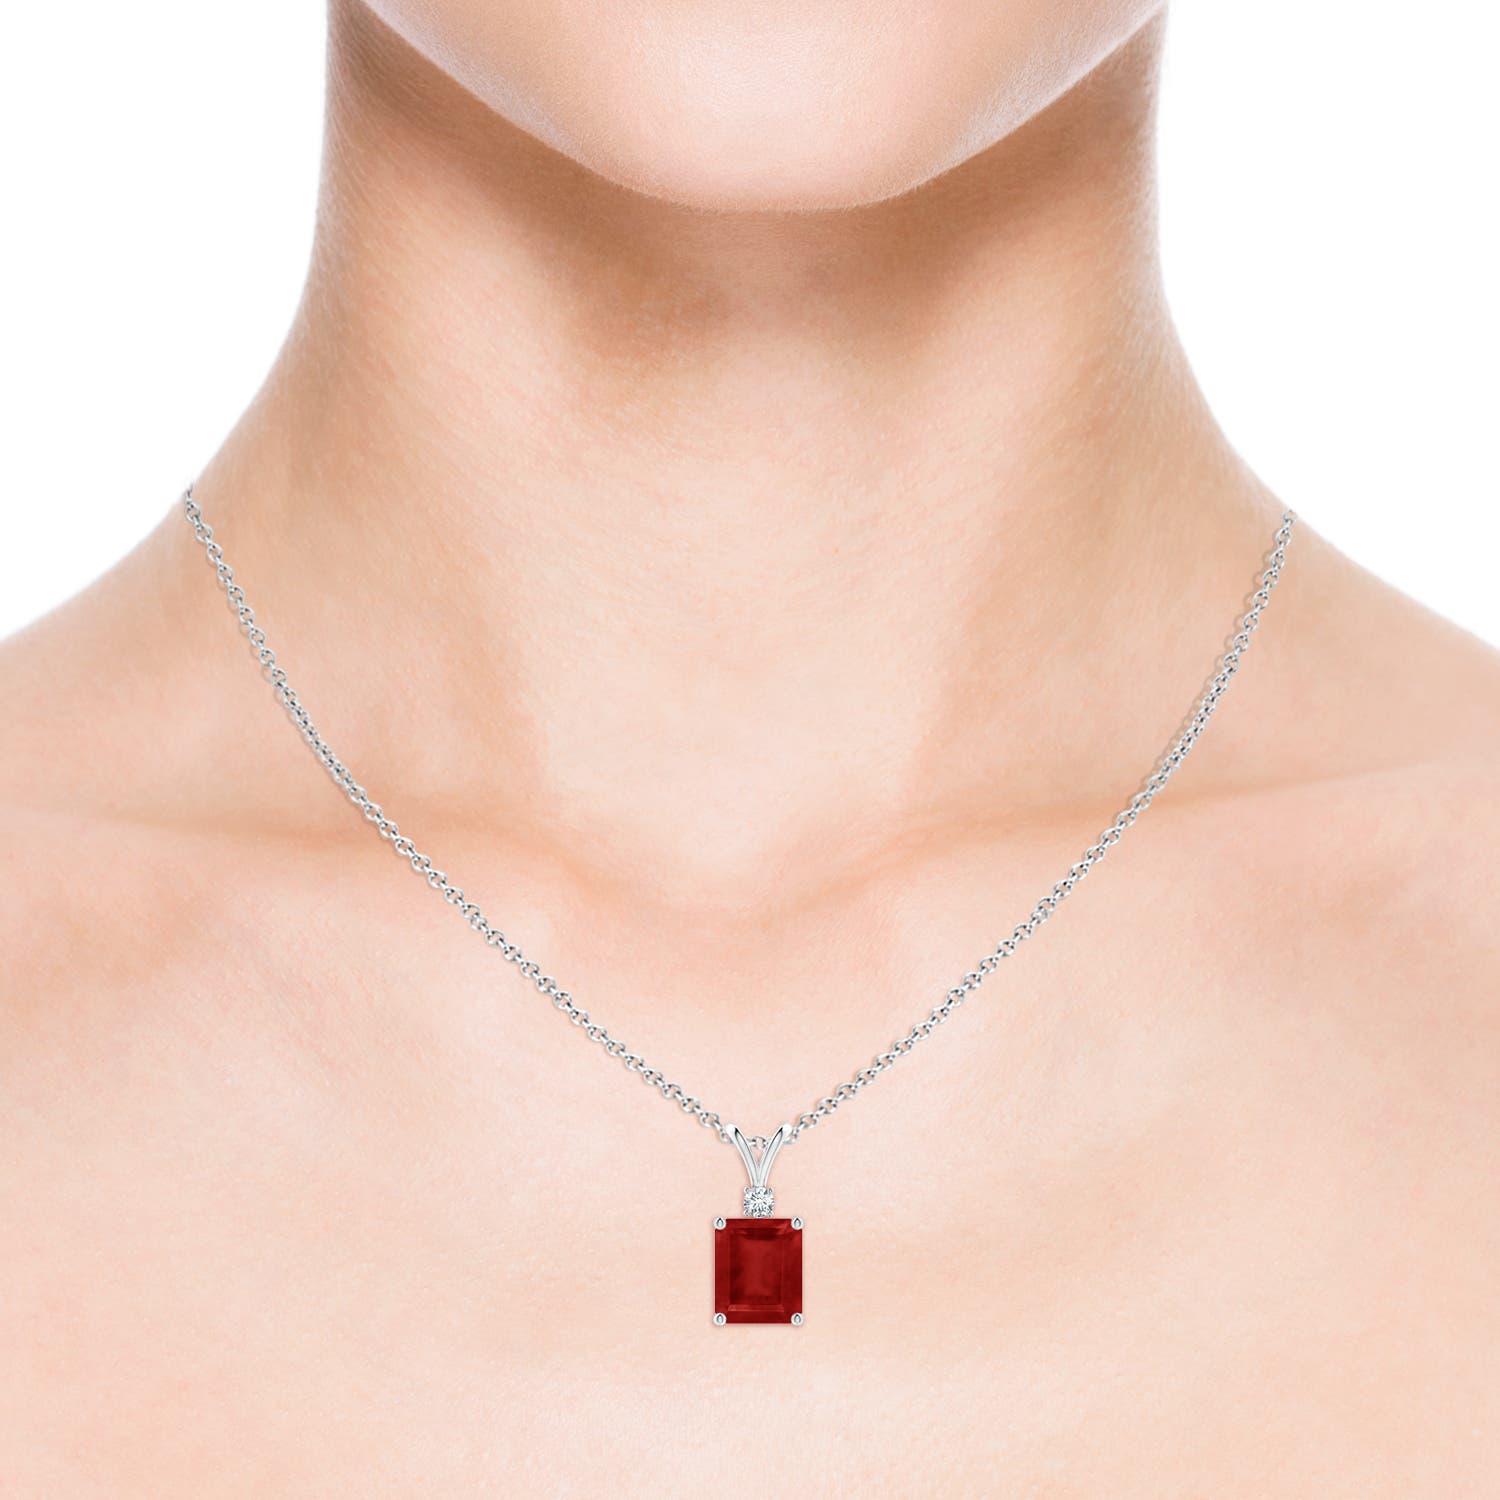 AA - Ruby / 6.41 CT / 14 KT White Gold